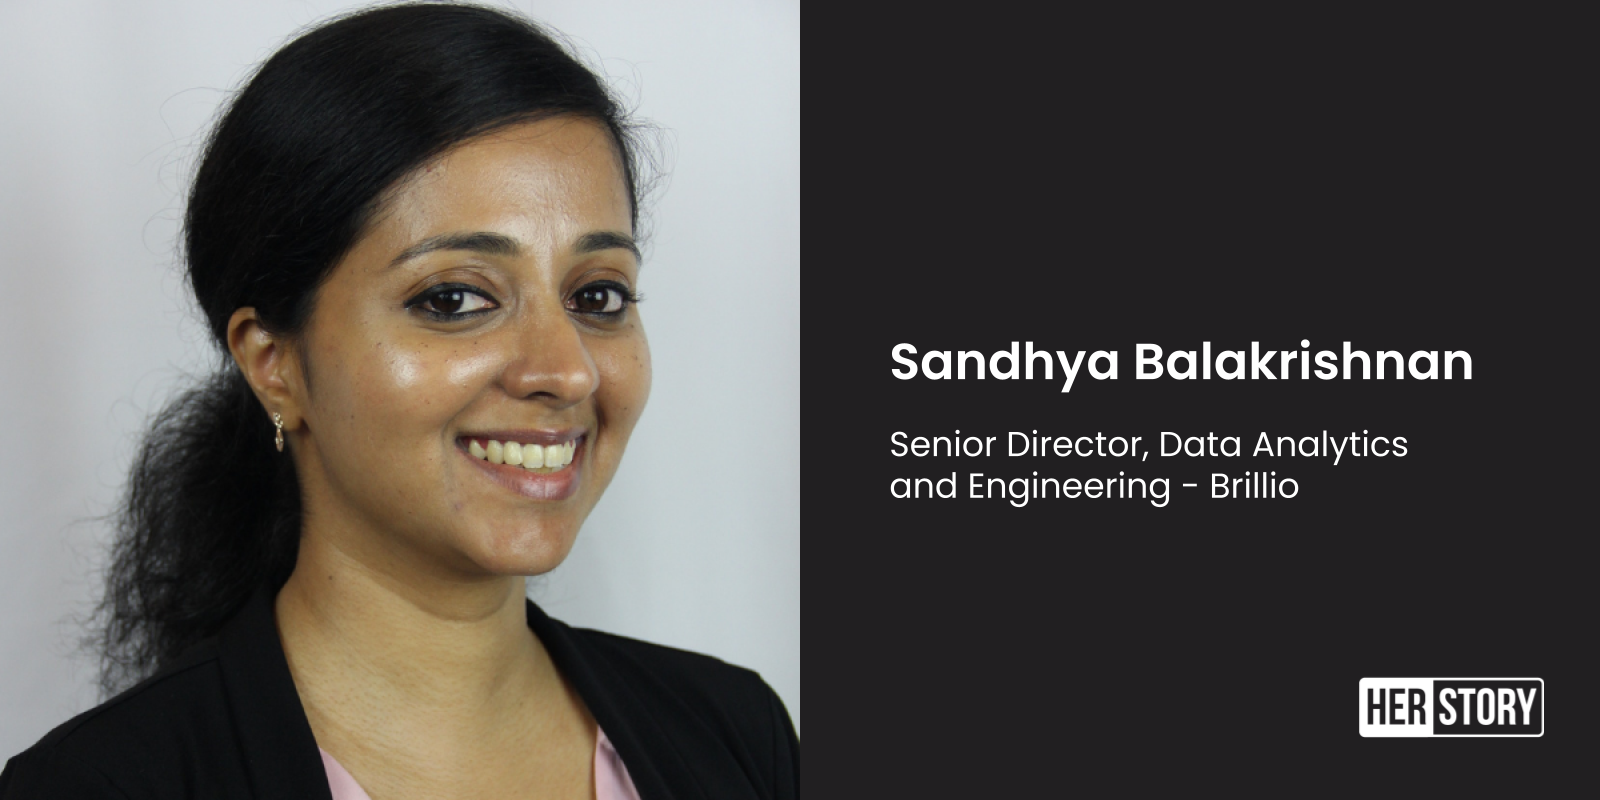 [Women in Tech] Inclusion means being open to ideas and leadership styles fundamentally different from the norm: Sandhya Balakrishnan of Brillio